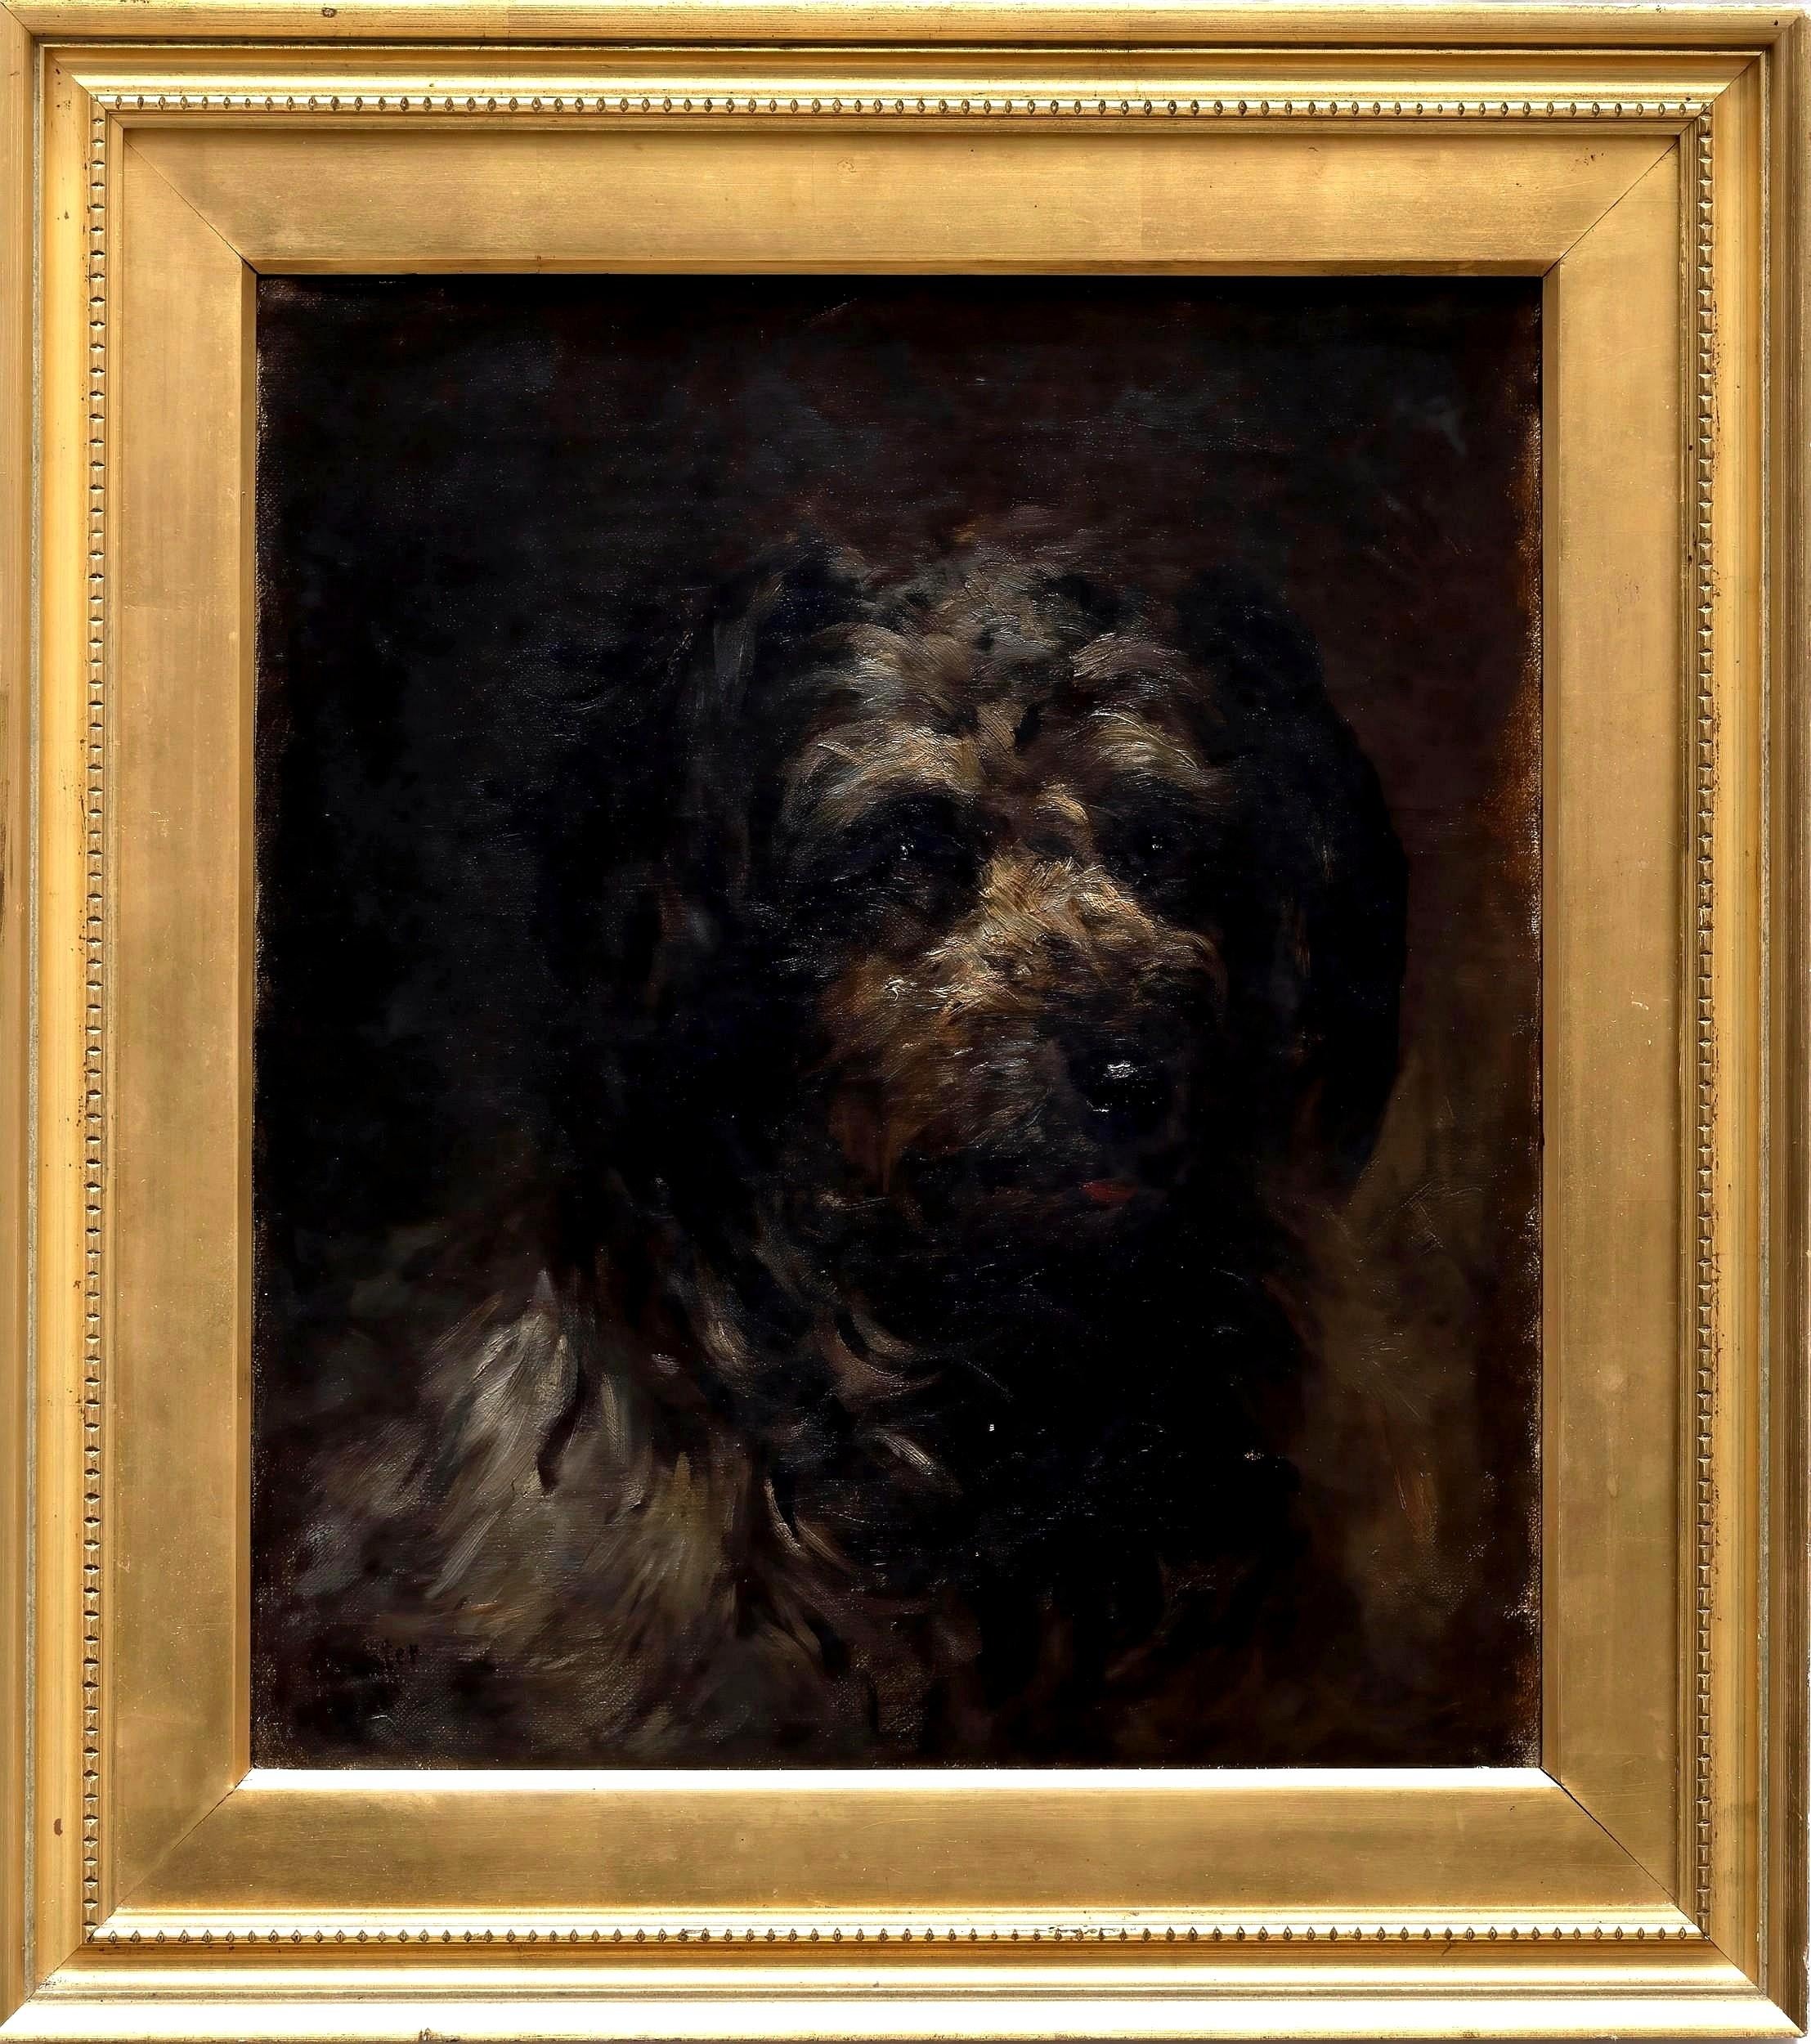 L. Lister Animal Painting - Portrait of a Terrier - 19th Century English Oil on Canvas Antique Dog Painting